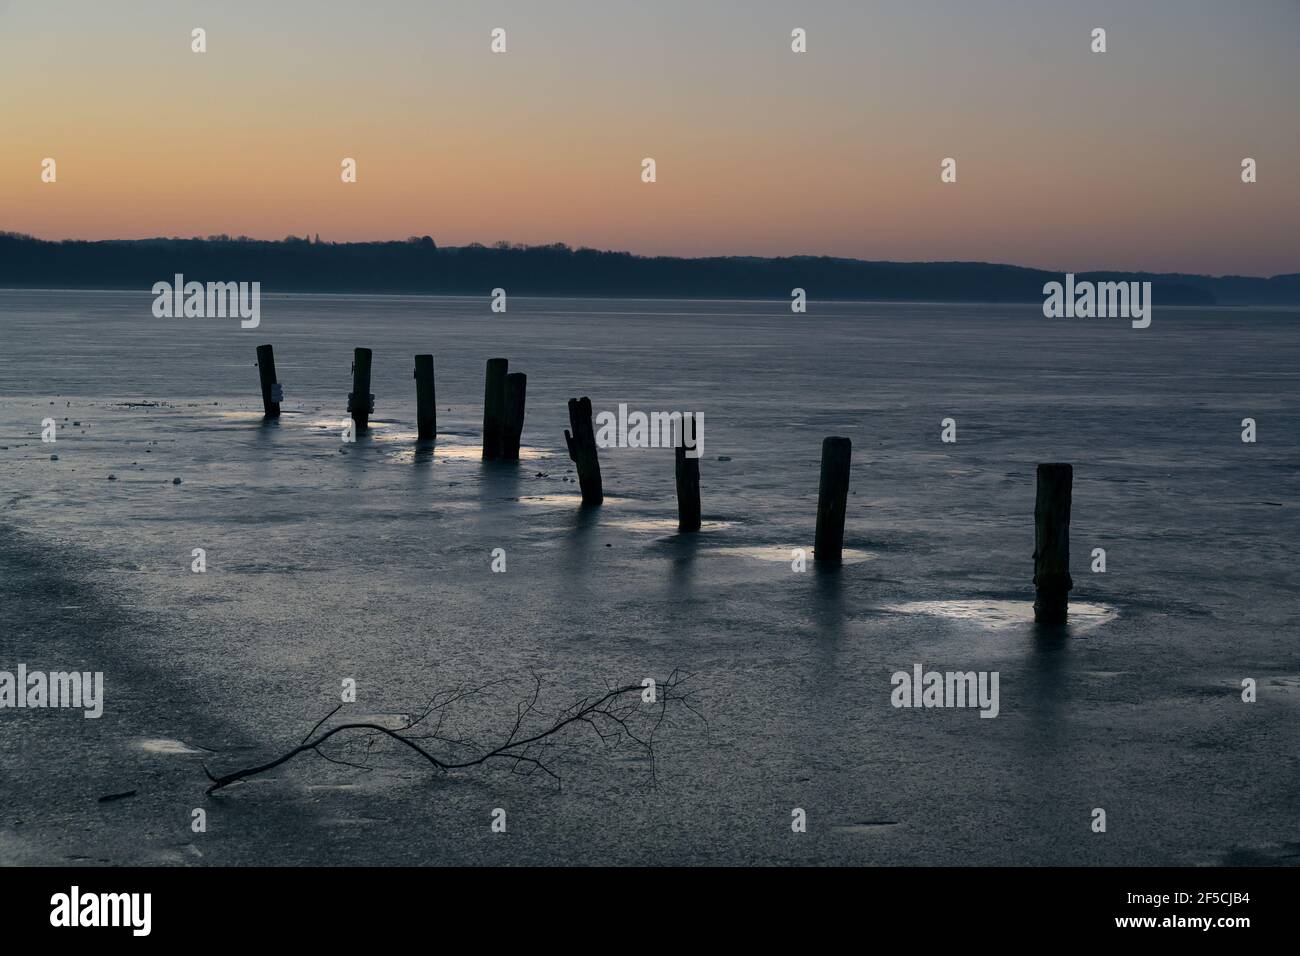 Row of black wooden piles in melting puddles in a frozen lake on a cold day at dawn, beautiful tranquil landscape scenery, copy space, selected focus Stock Photo